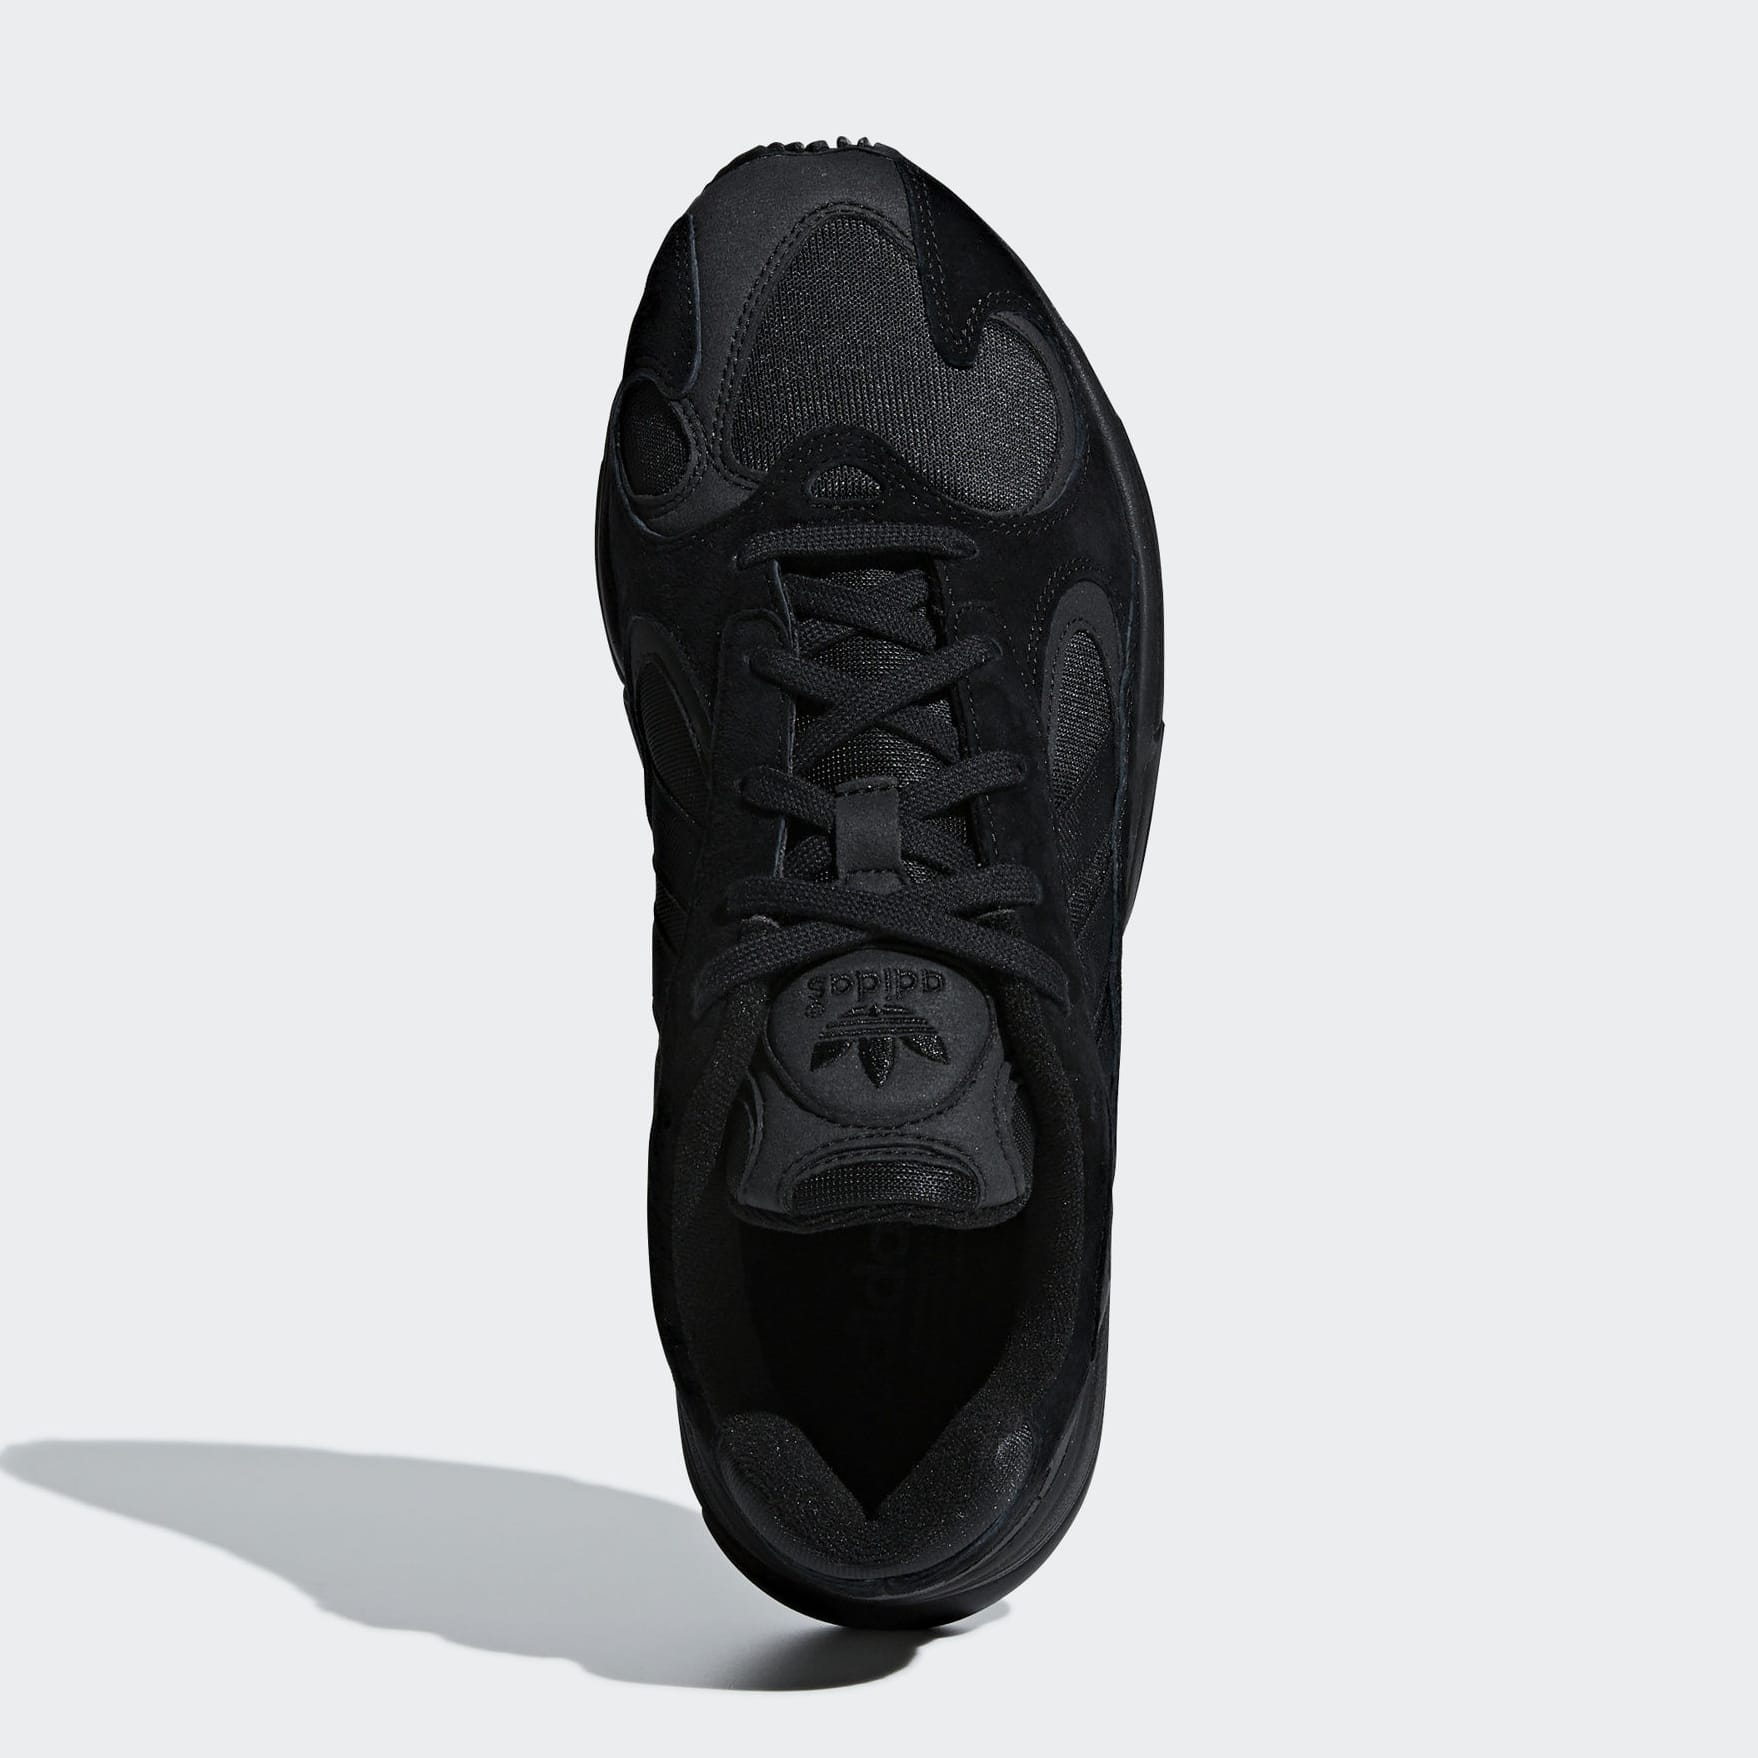 Adidas Yung-1 Triple Black Release Date G27026 Top